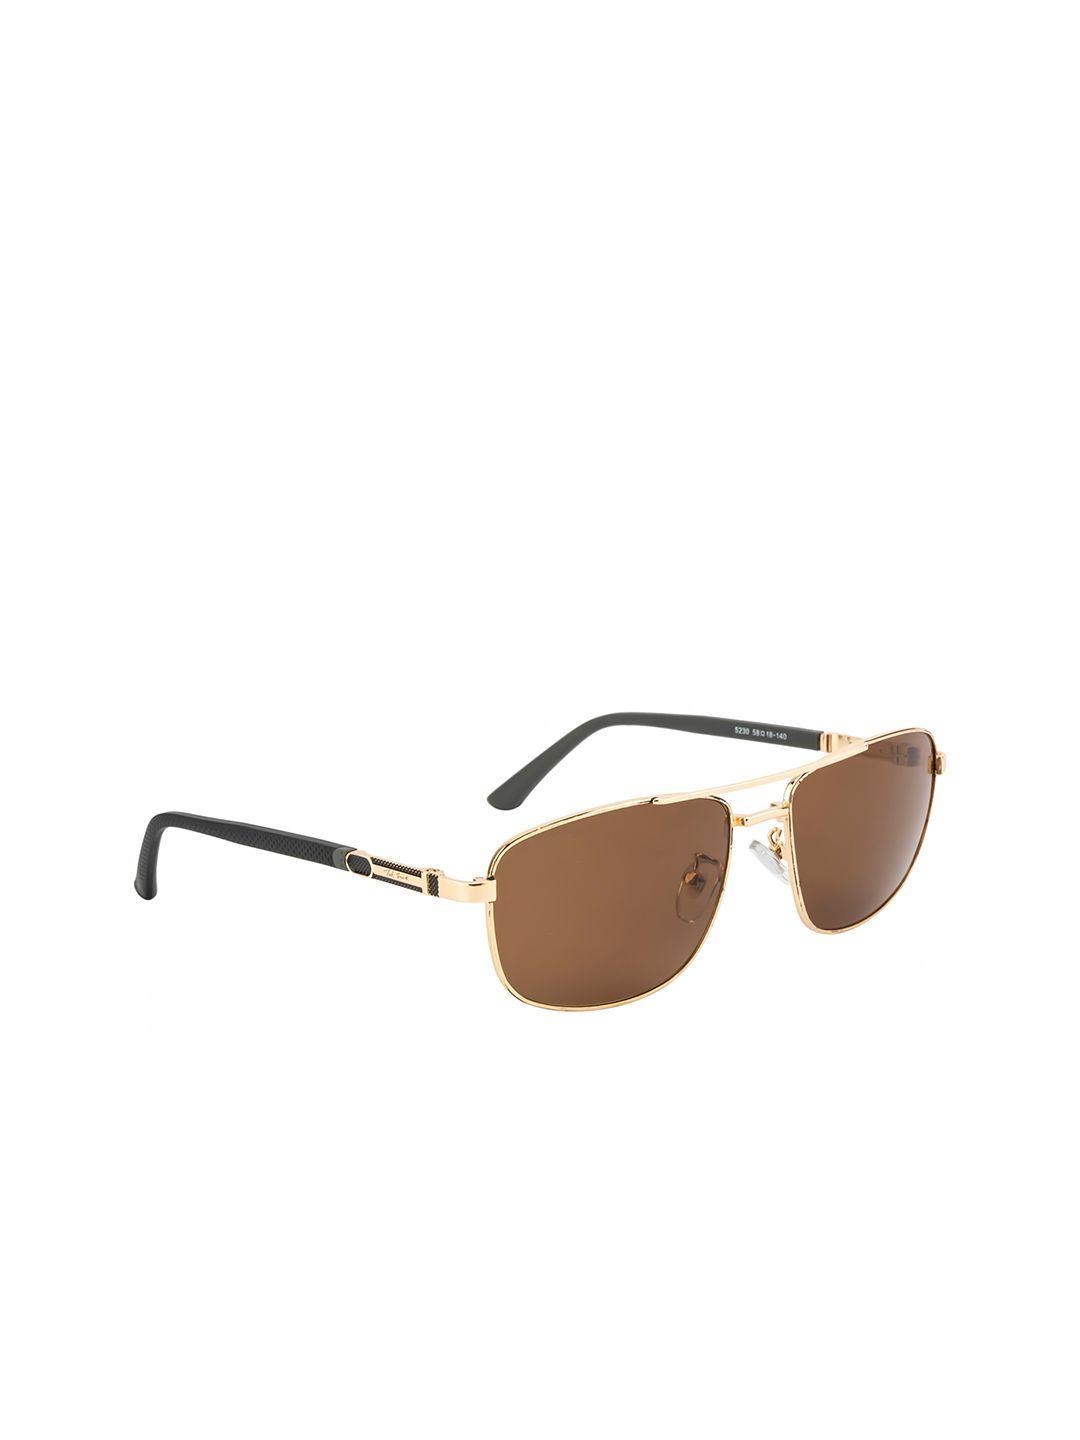 ted-smith-unisex-brown-lens-&-gold-toned-aviator-sunglasses-with-uv-protected-lens